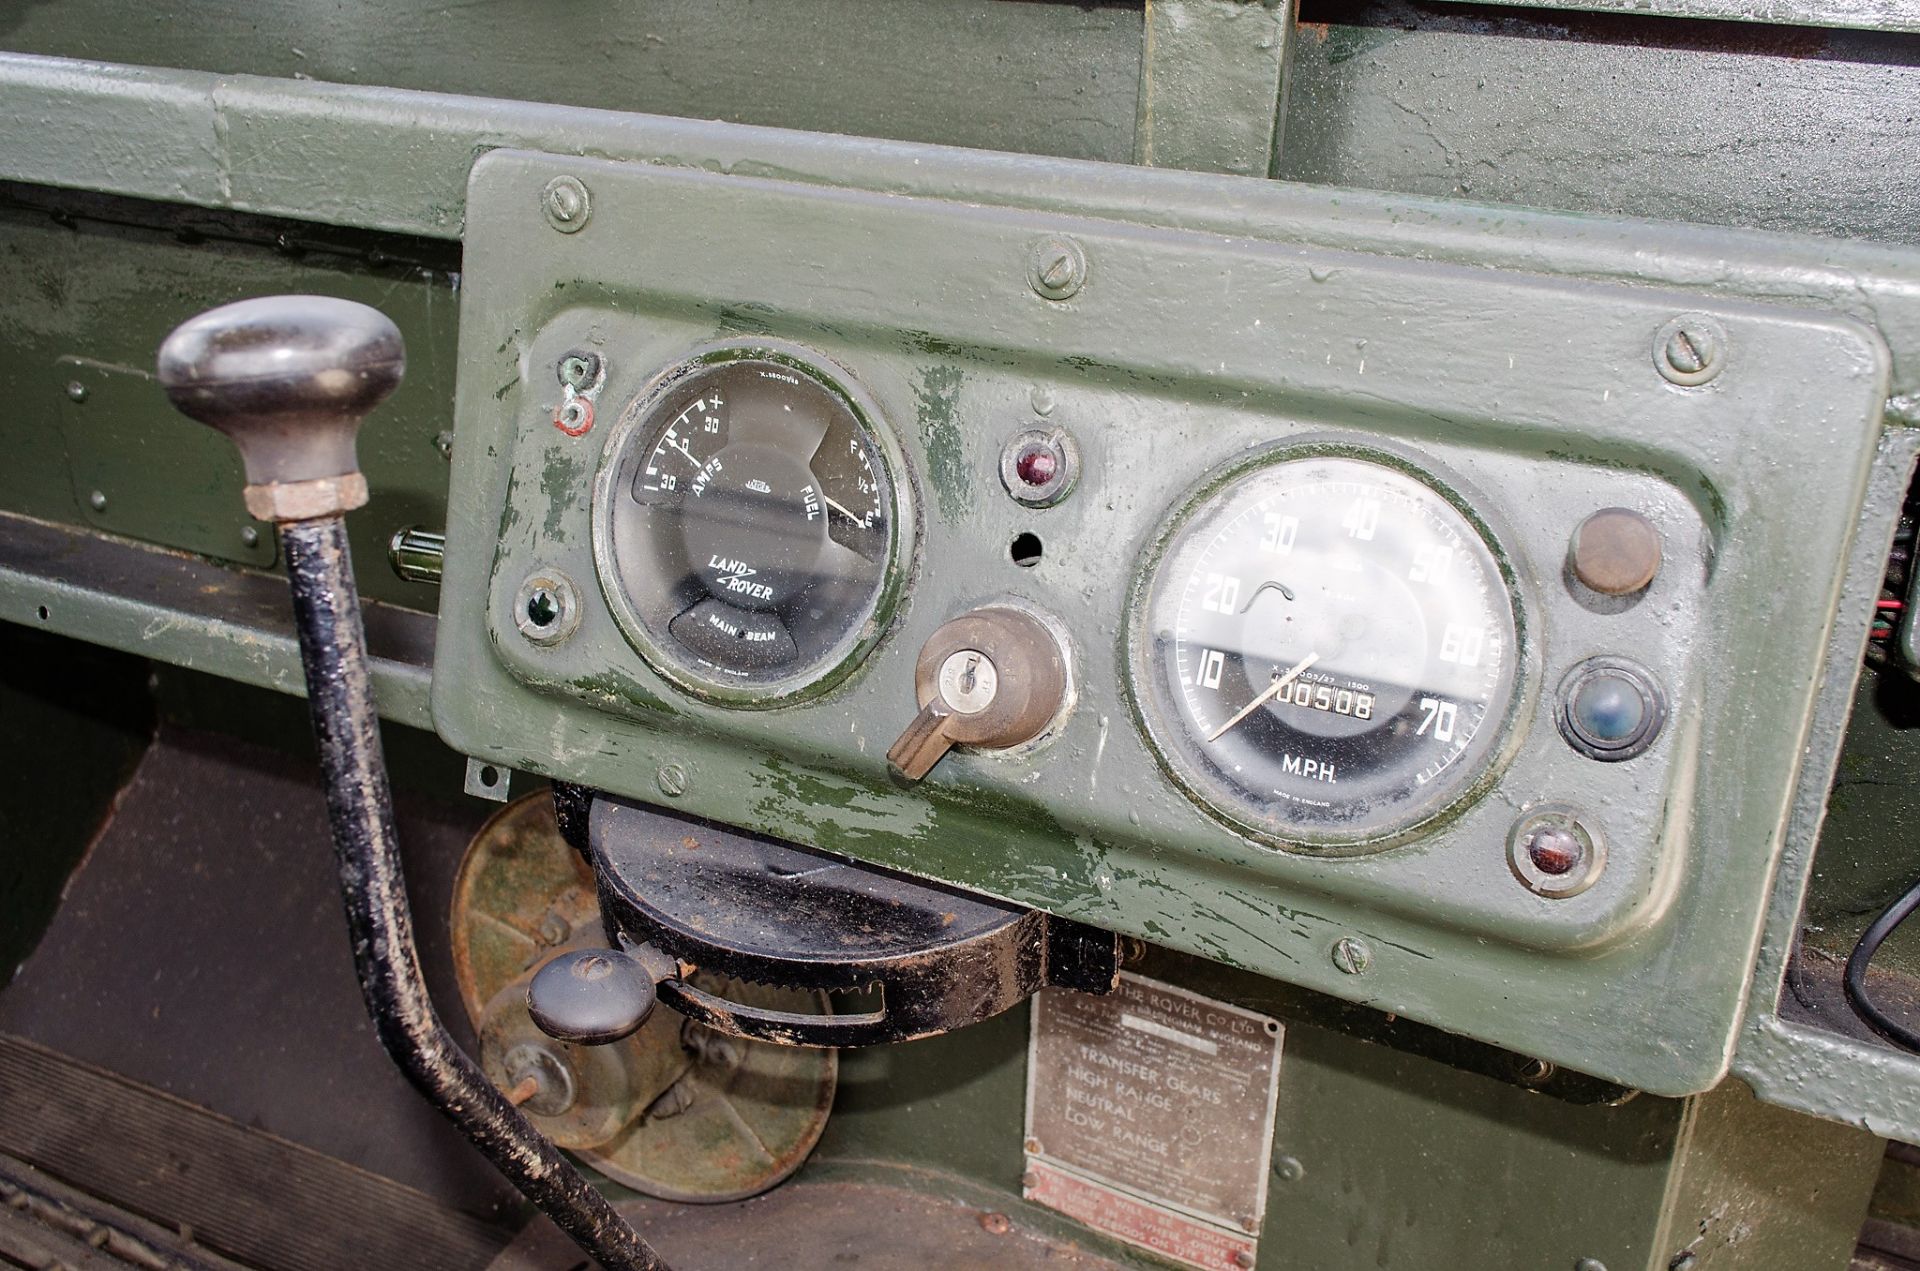 Land Rover Series 1 88 inch 4x4 diesel light utility vehicle Registration Number: NFR 173 Date of - Image 25 of 29